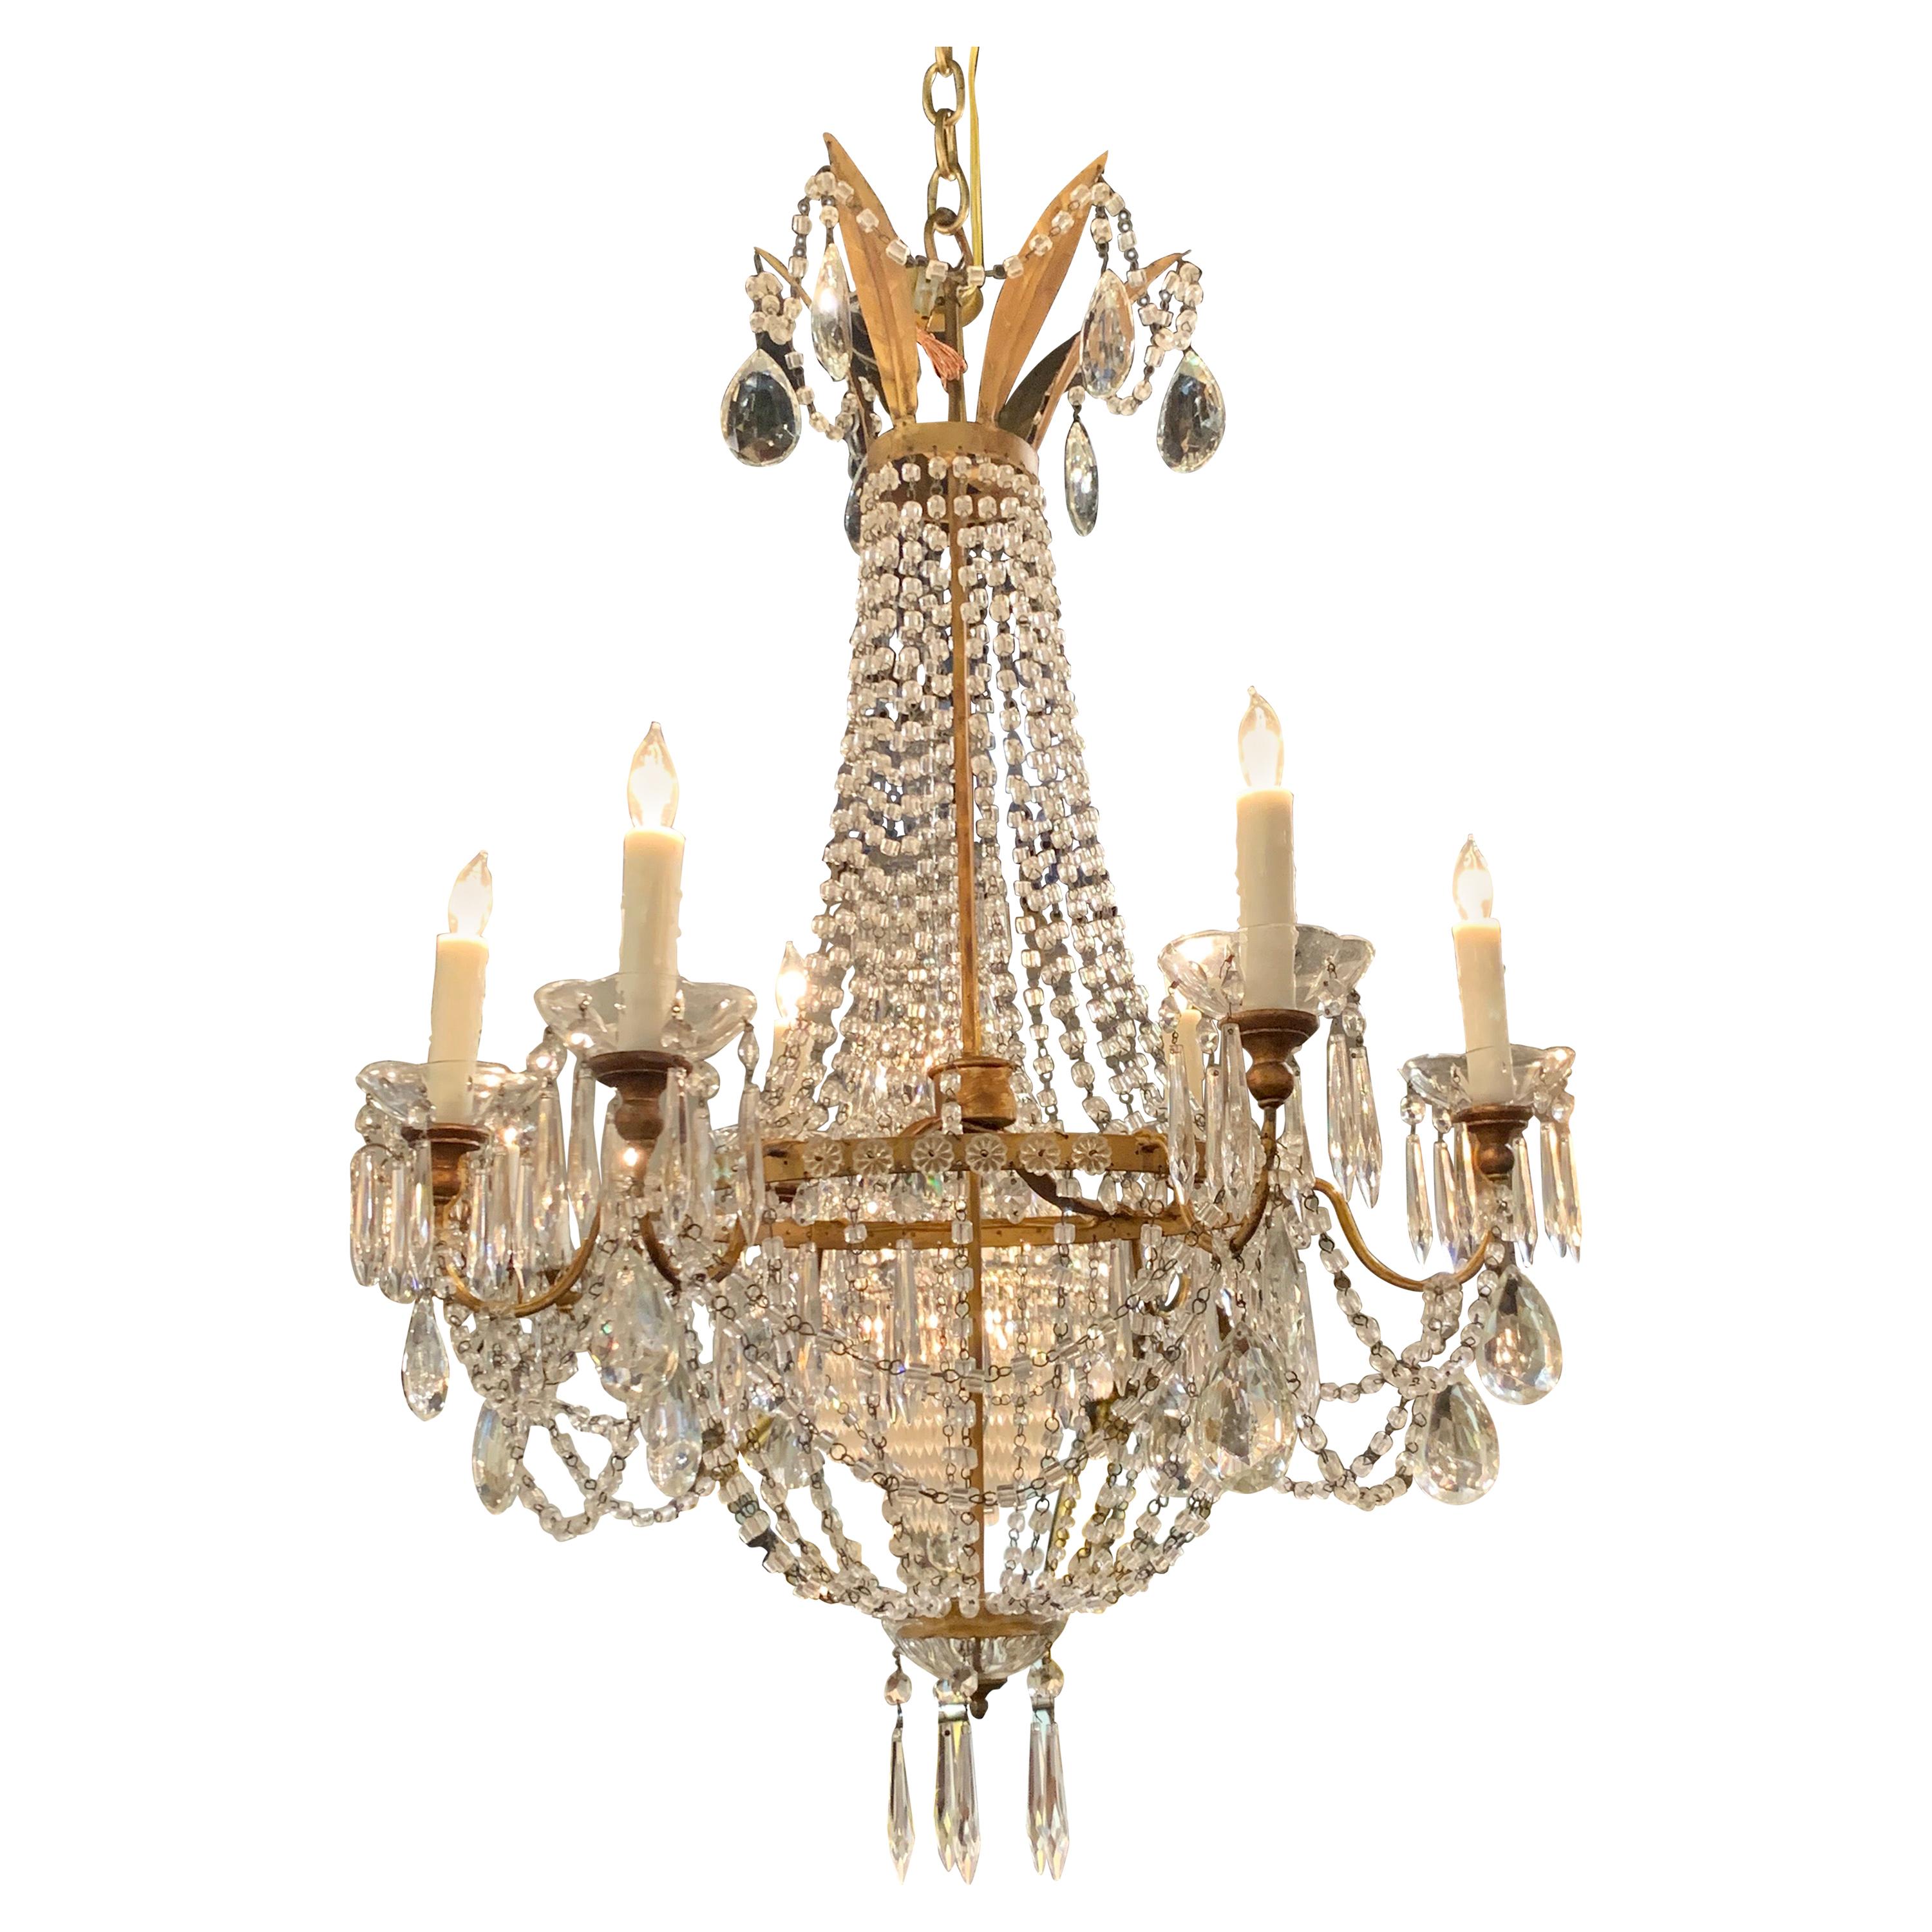 19th Century Italian Empire Style Gilt Metal and Crystal Chandelier